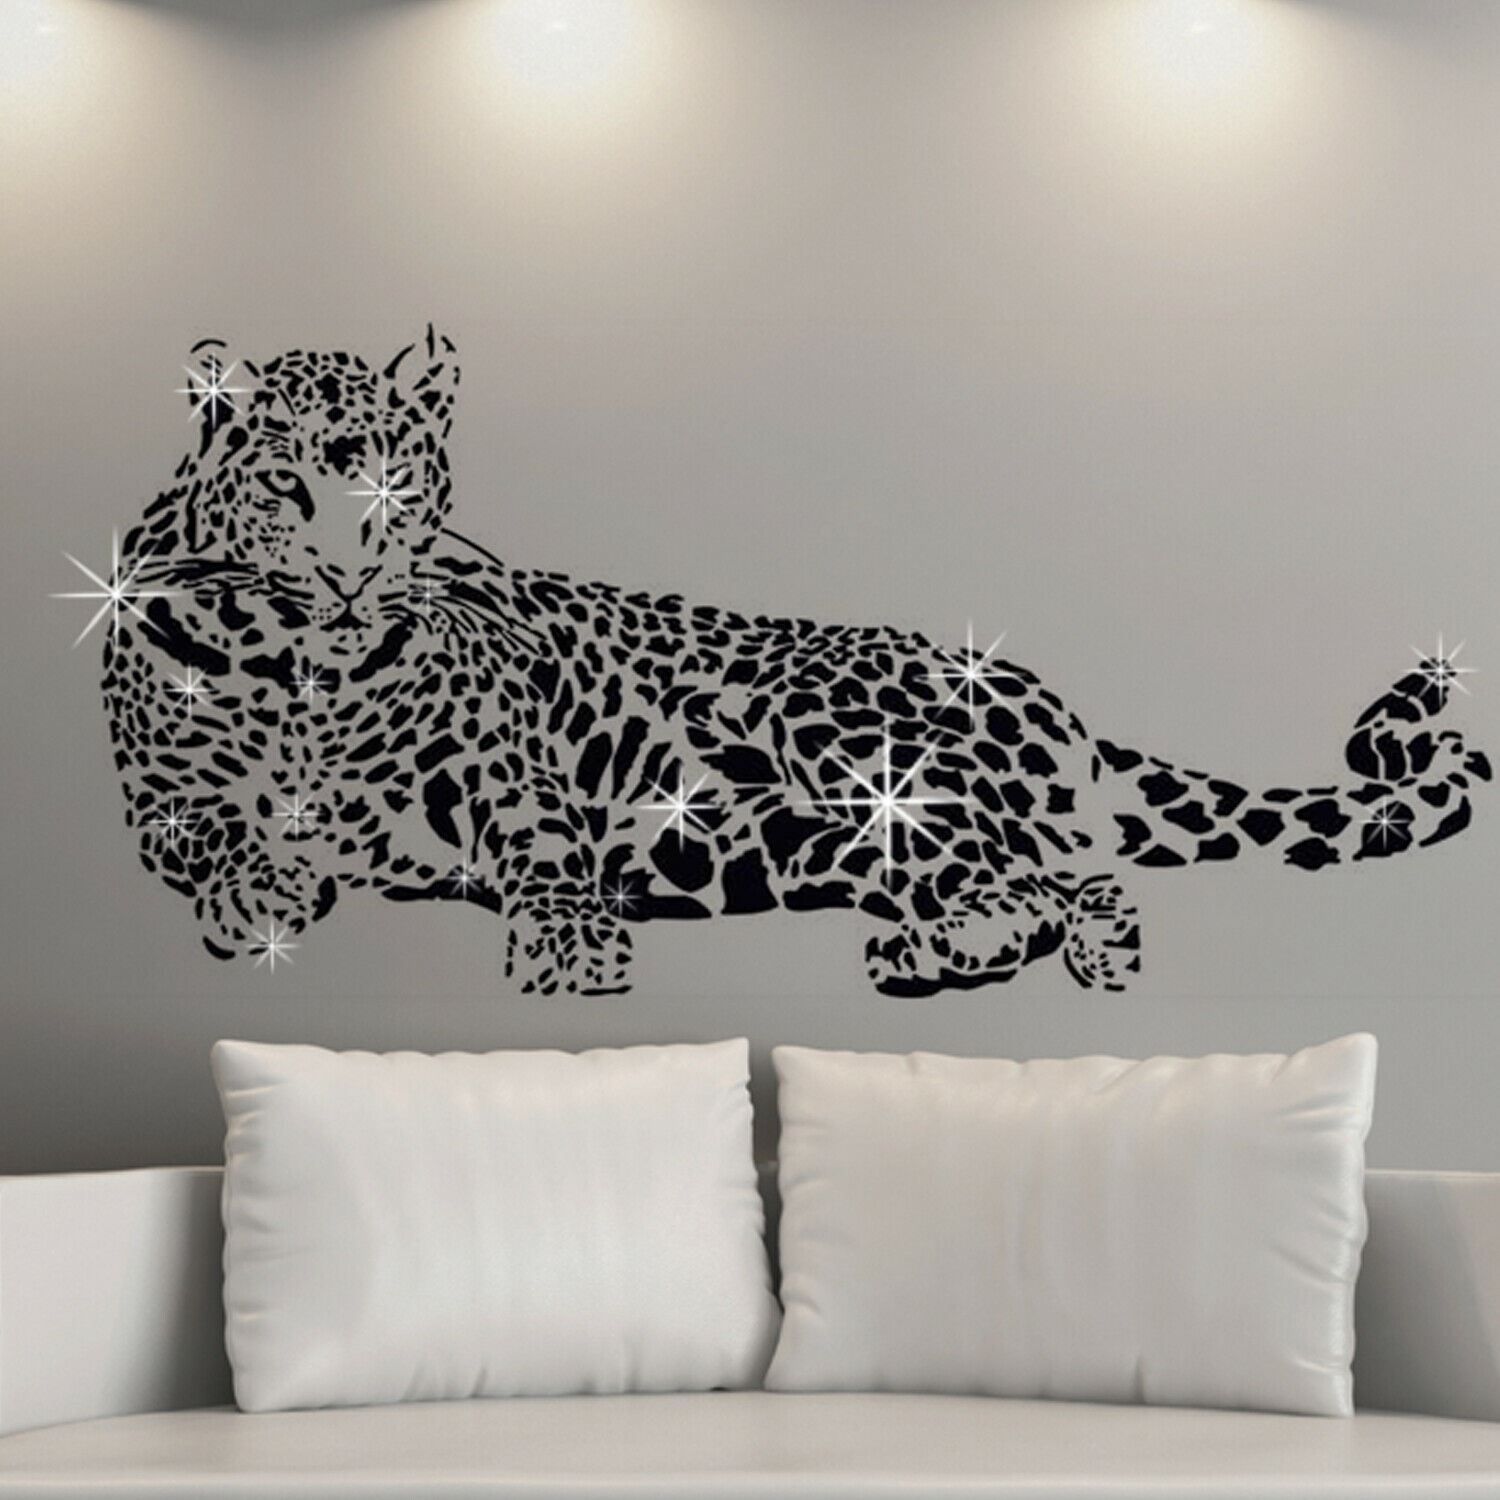 - Transform your room with the stunning Walplus wall sticker collection.
- Walplus' high quality self-adhesive stickers are quick to apply, and can be easily removed and repositioned without damage. 
- Simply peel and stick to any smooth, even surface.
- Application instructions included.
- Eco-friendly materials and Non-toxic.